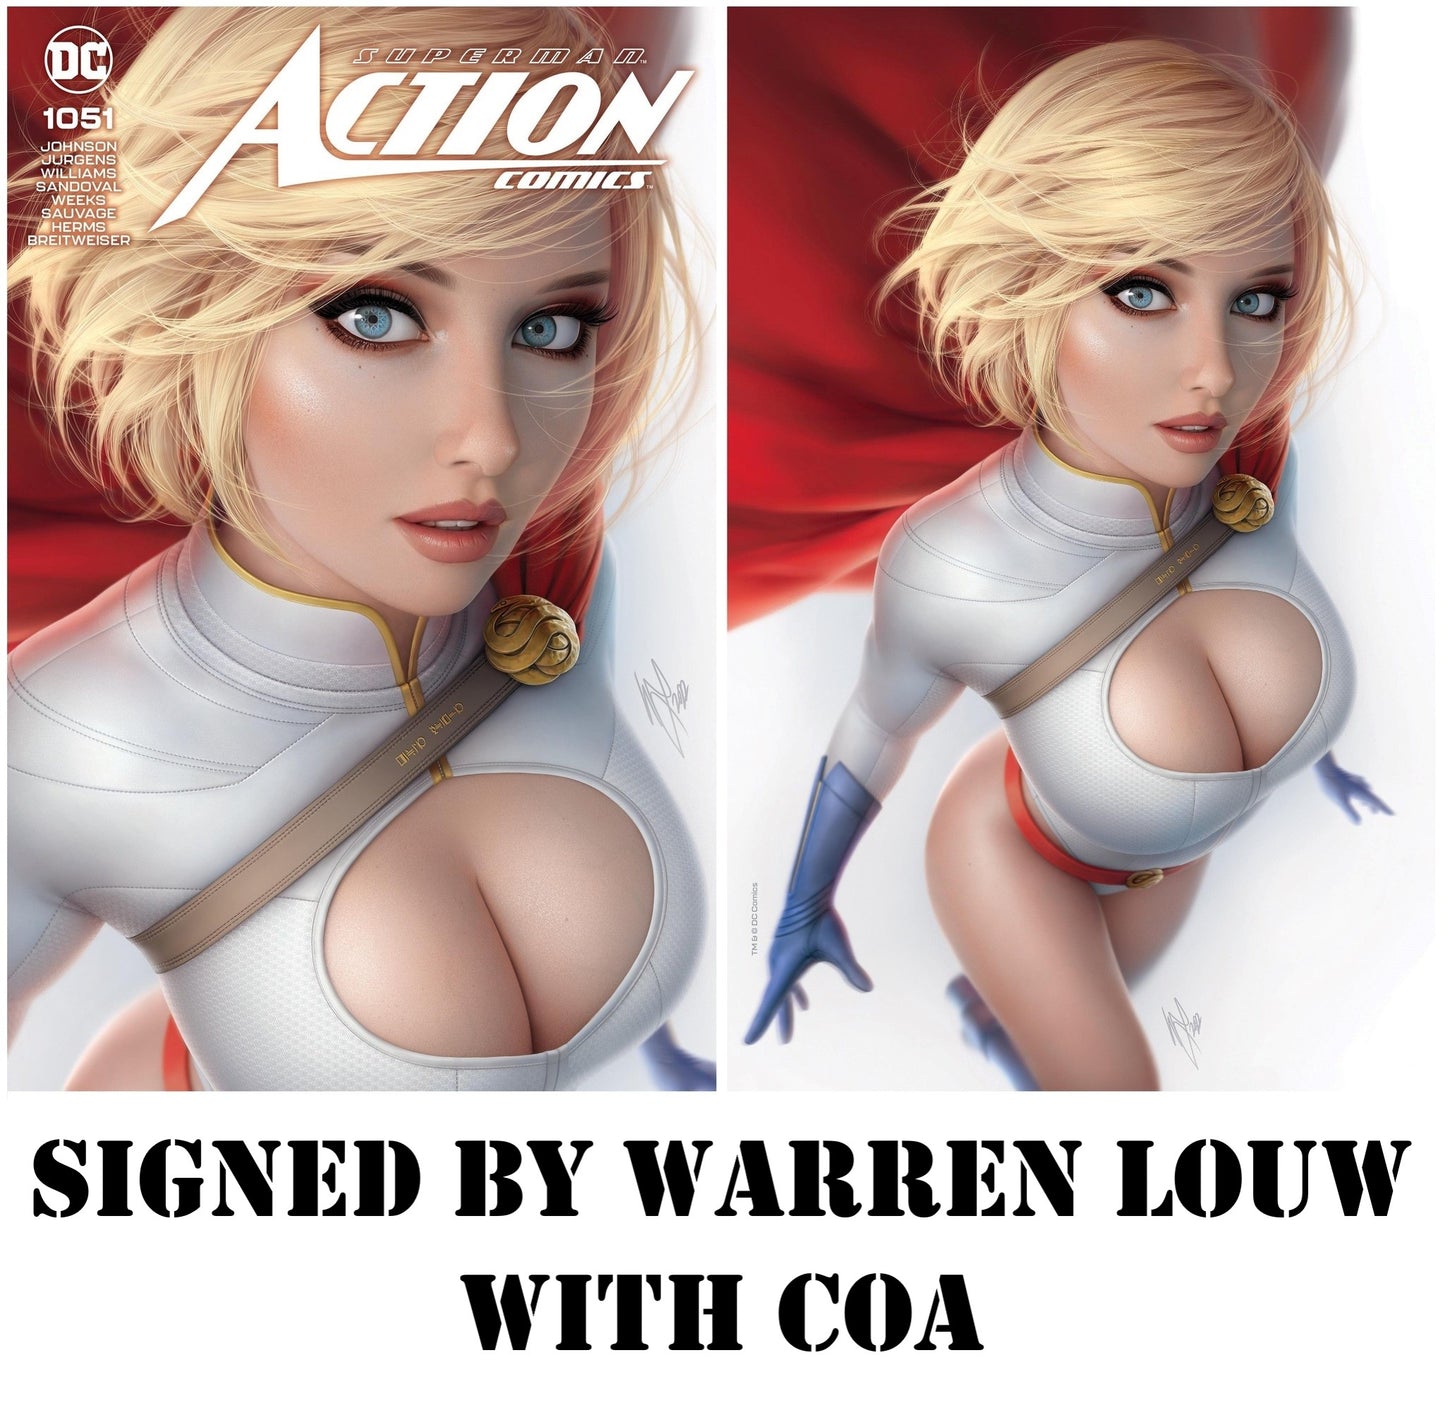 ACTION COMICS #1051 WARREN LOUW TRADE DRESS/VIRGIN VARIANT SET LIMITED TO 1500 SETS SIGNED BY WARREN LOUW WITH COA